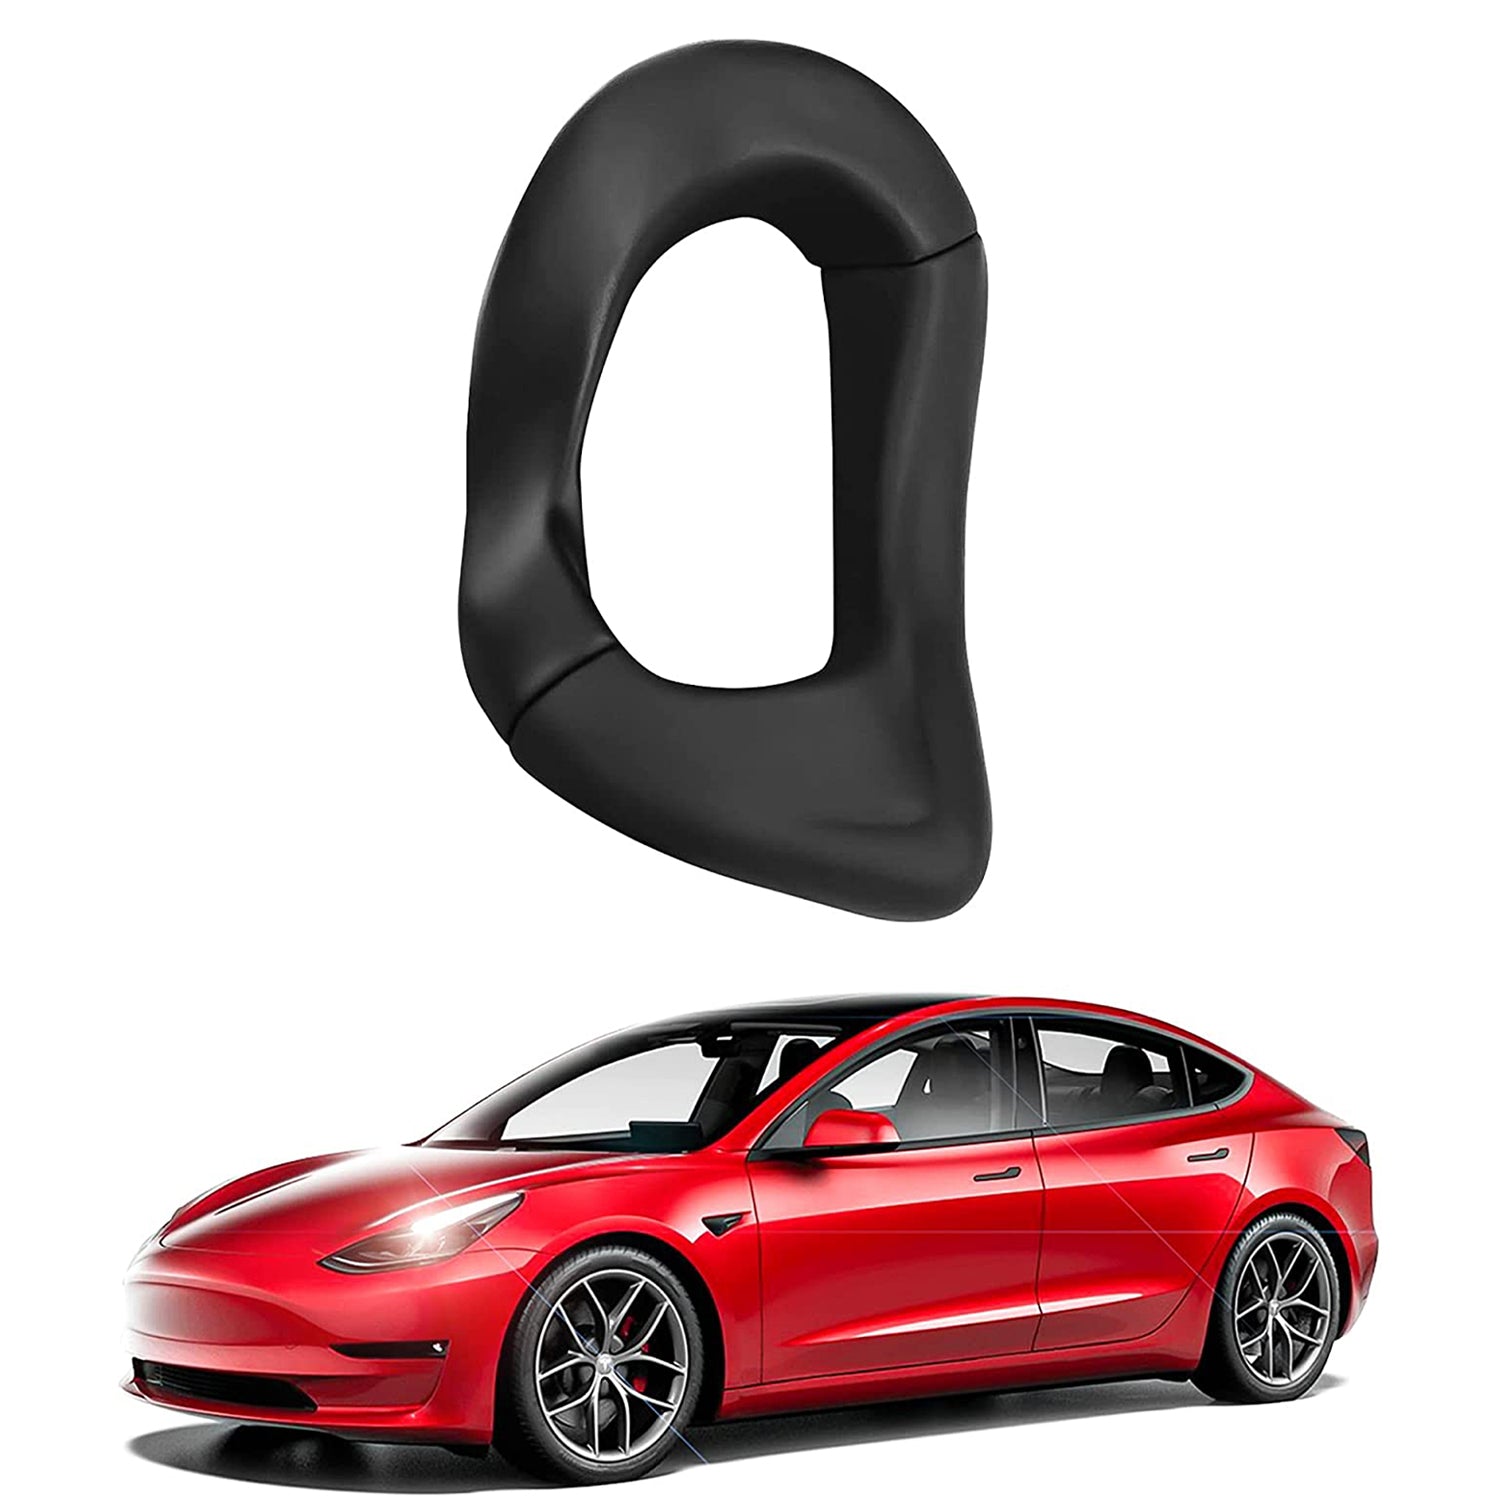 tesla model 3 Y car 2022 2023 2021 2020 2019 2018 s3xy Steering Wheel Booster Auto-pilot arcoche accessories accessory aftermarket price Vehicles standard long range performance sr+ electric car rwd ev interior exterior diy decoration price elon musk must have black white red blue 5 7 seats seat